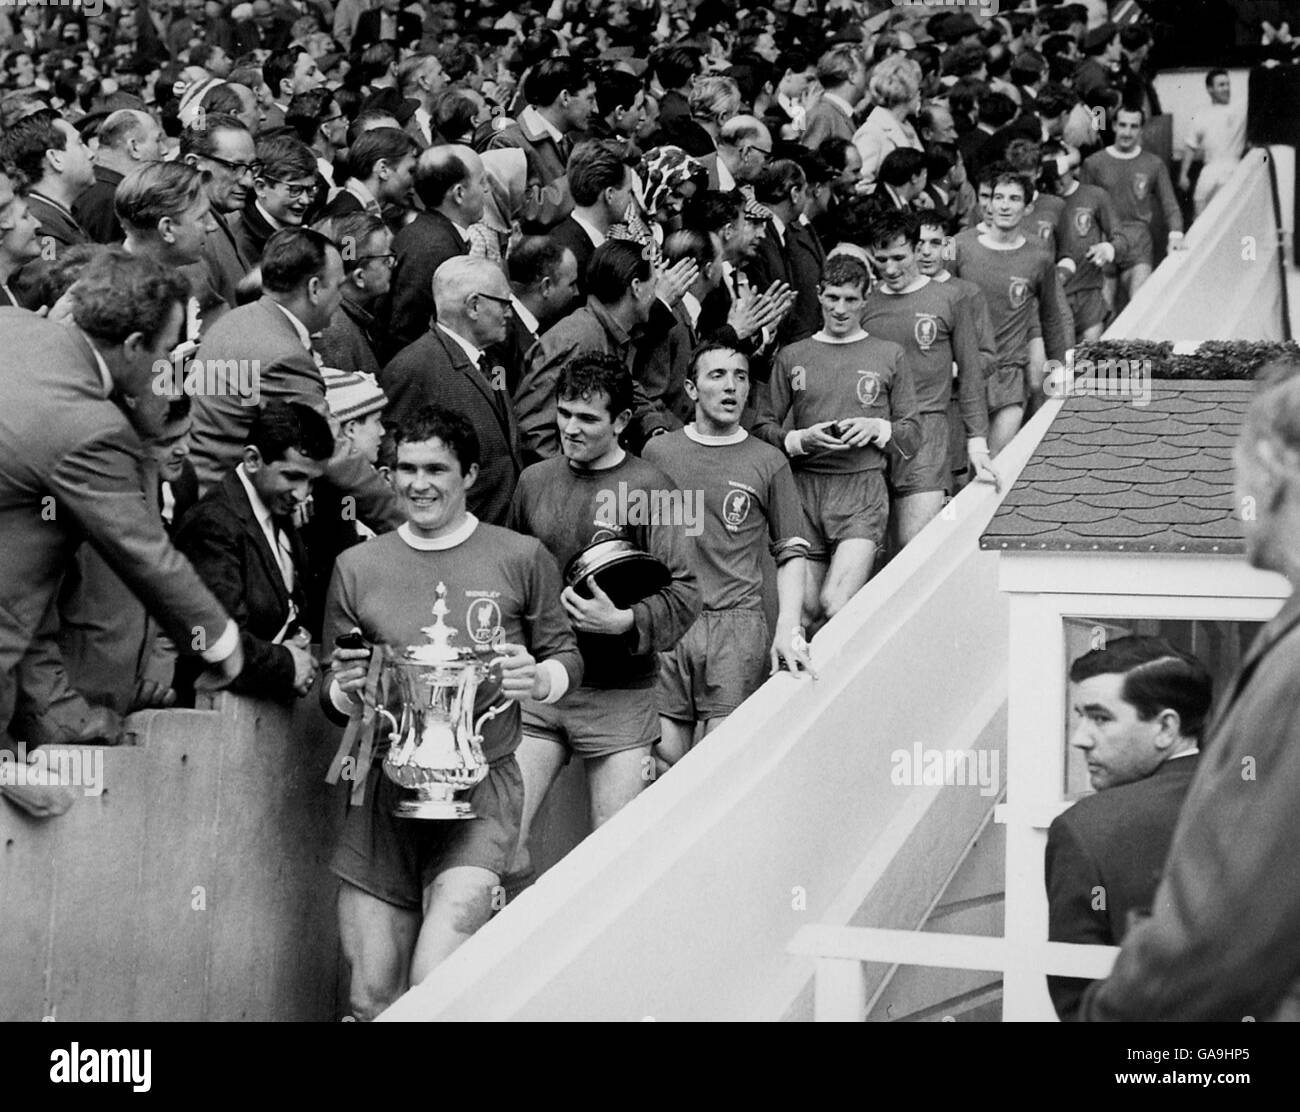 Liverpool captain Ron Yeats (l) carries the FA Cup down Wembley's 39 steps, followed by teammates Tommy Lawrence (carrying base of cup), Peter Thompson, Geoff Strong, Tommy Smith, Ian Callaghan, Wilf Stevenson, Chris Lawler, Roger Hunt, Ian St John and Gerry Byrne Stock Photo